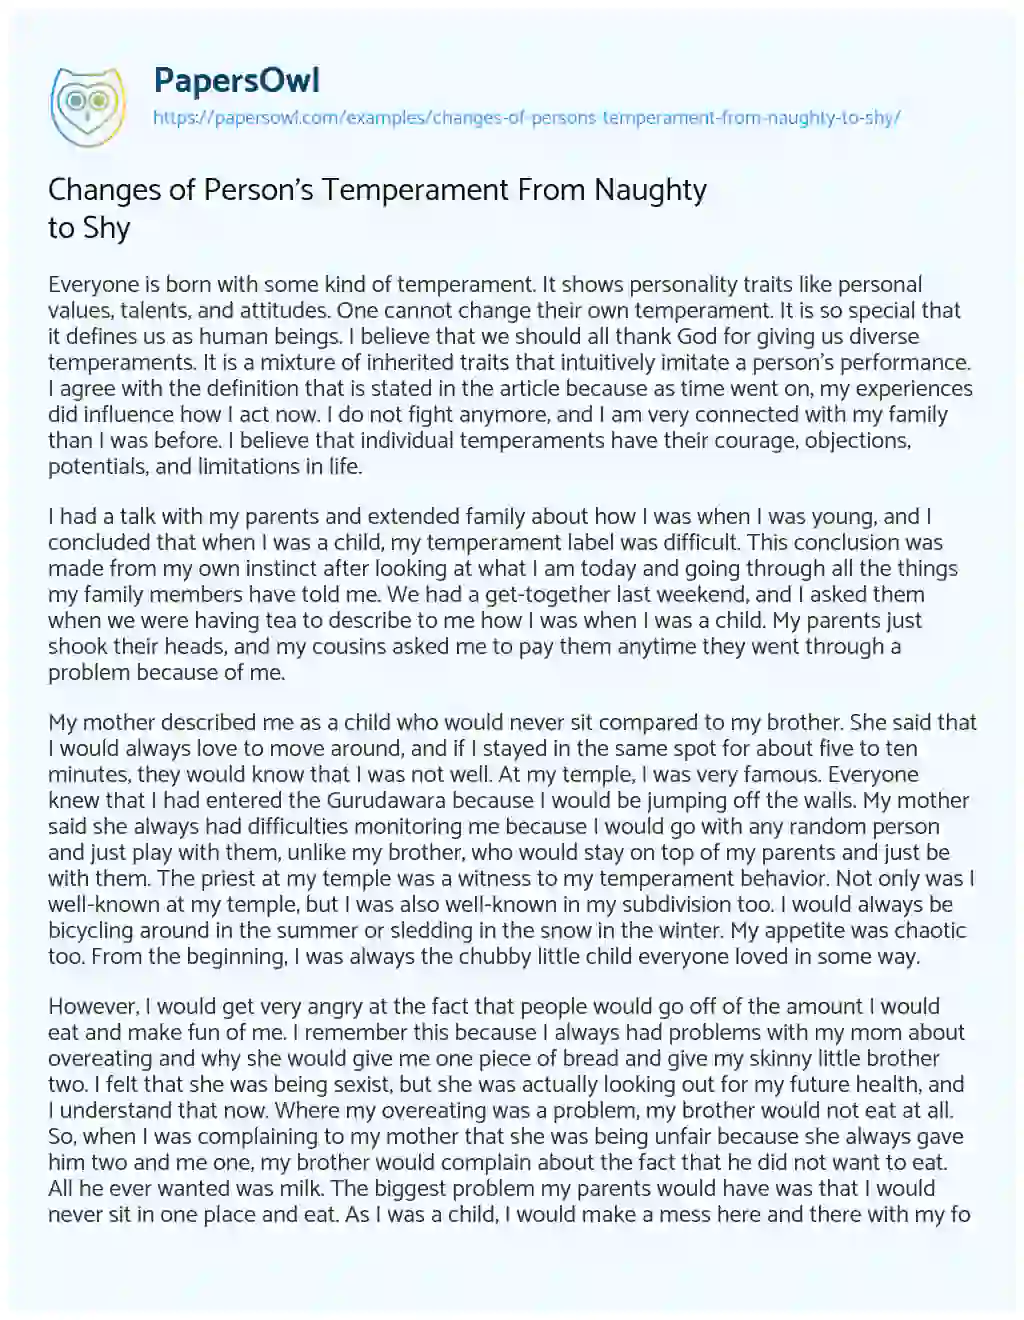 Essay on Changes of Person’s Temperament from Naughty to Shy